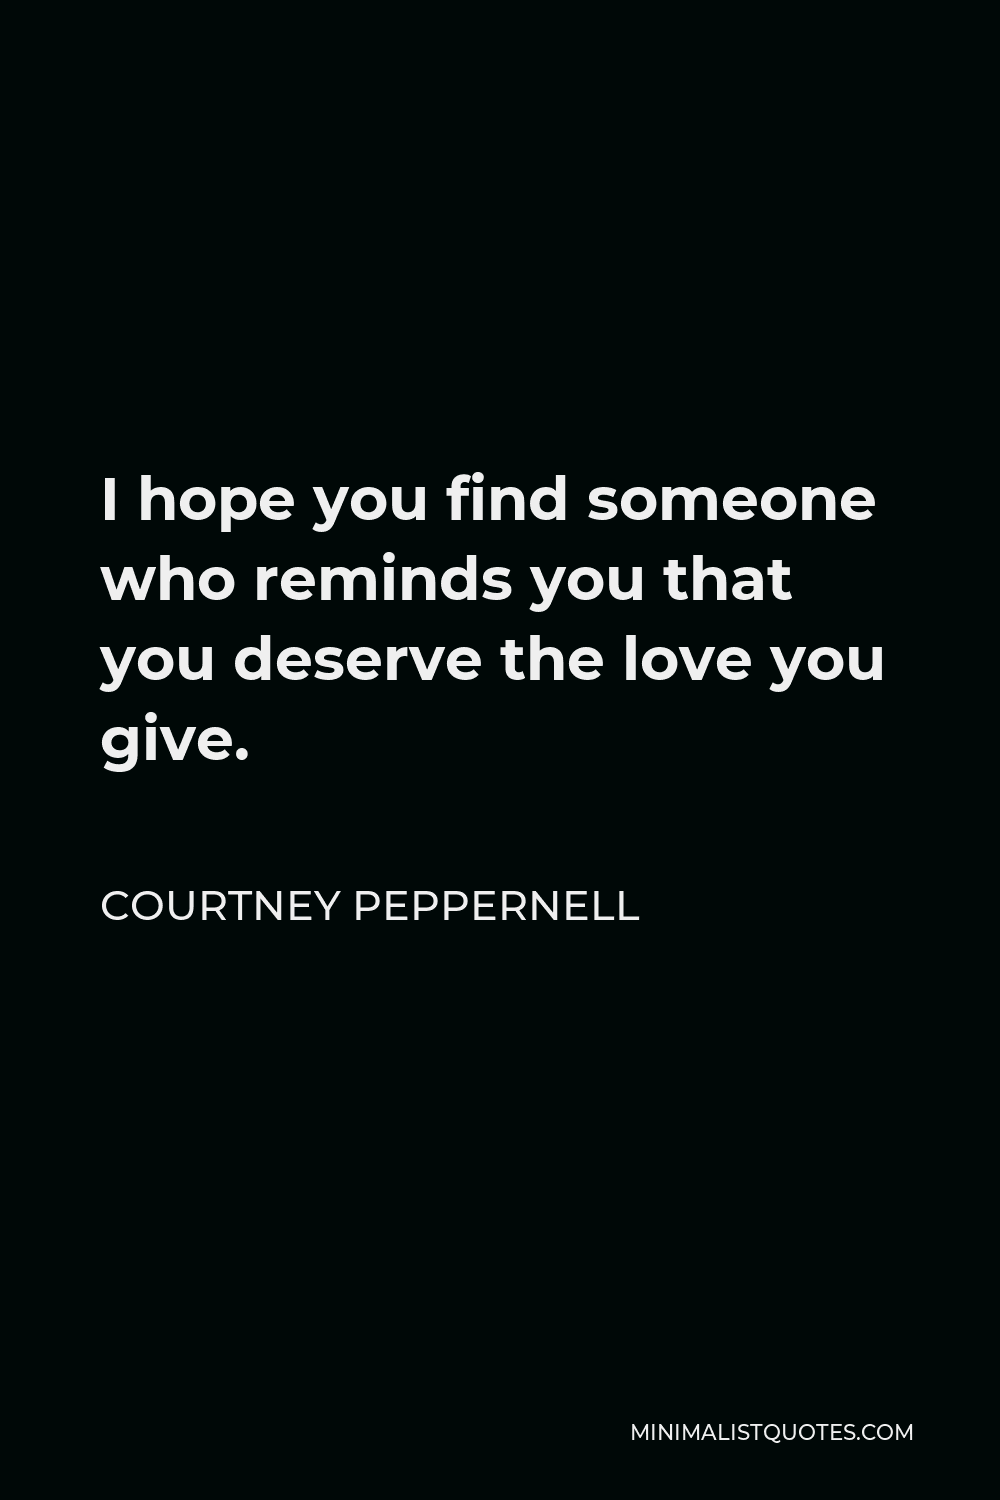 Courtney Peppernell Quote - I hope you find someone who reminds you that you deserve the love you give.